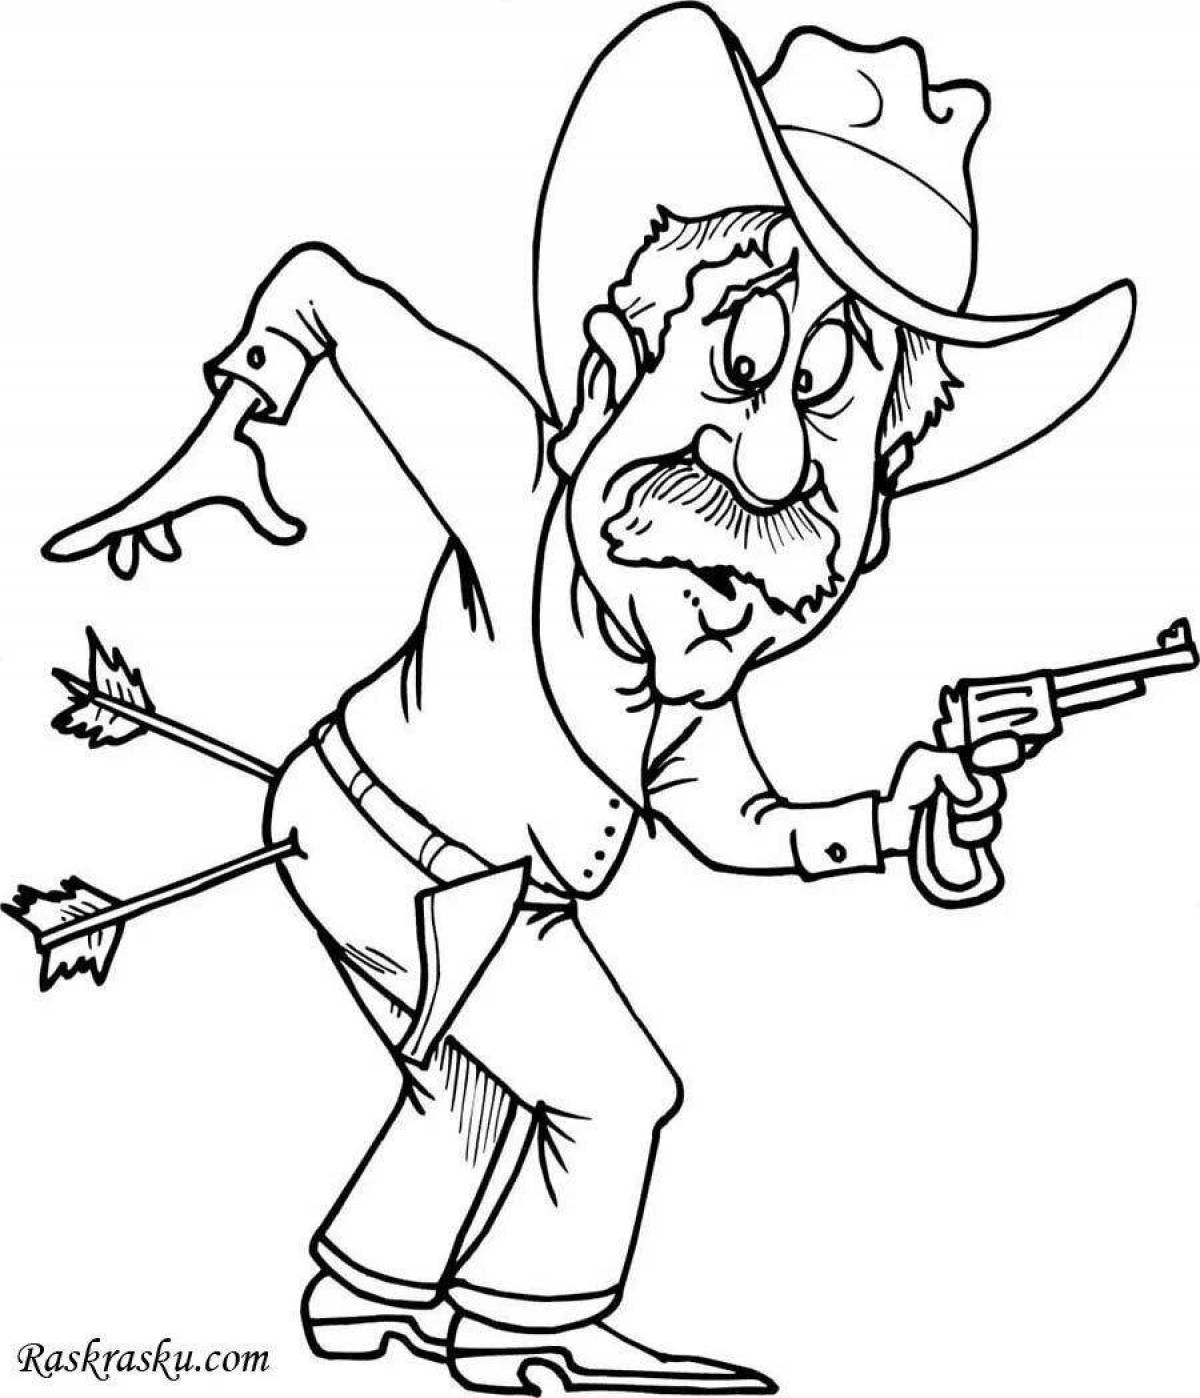 Playful robbers coloring page